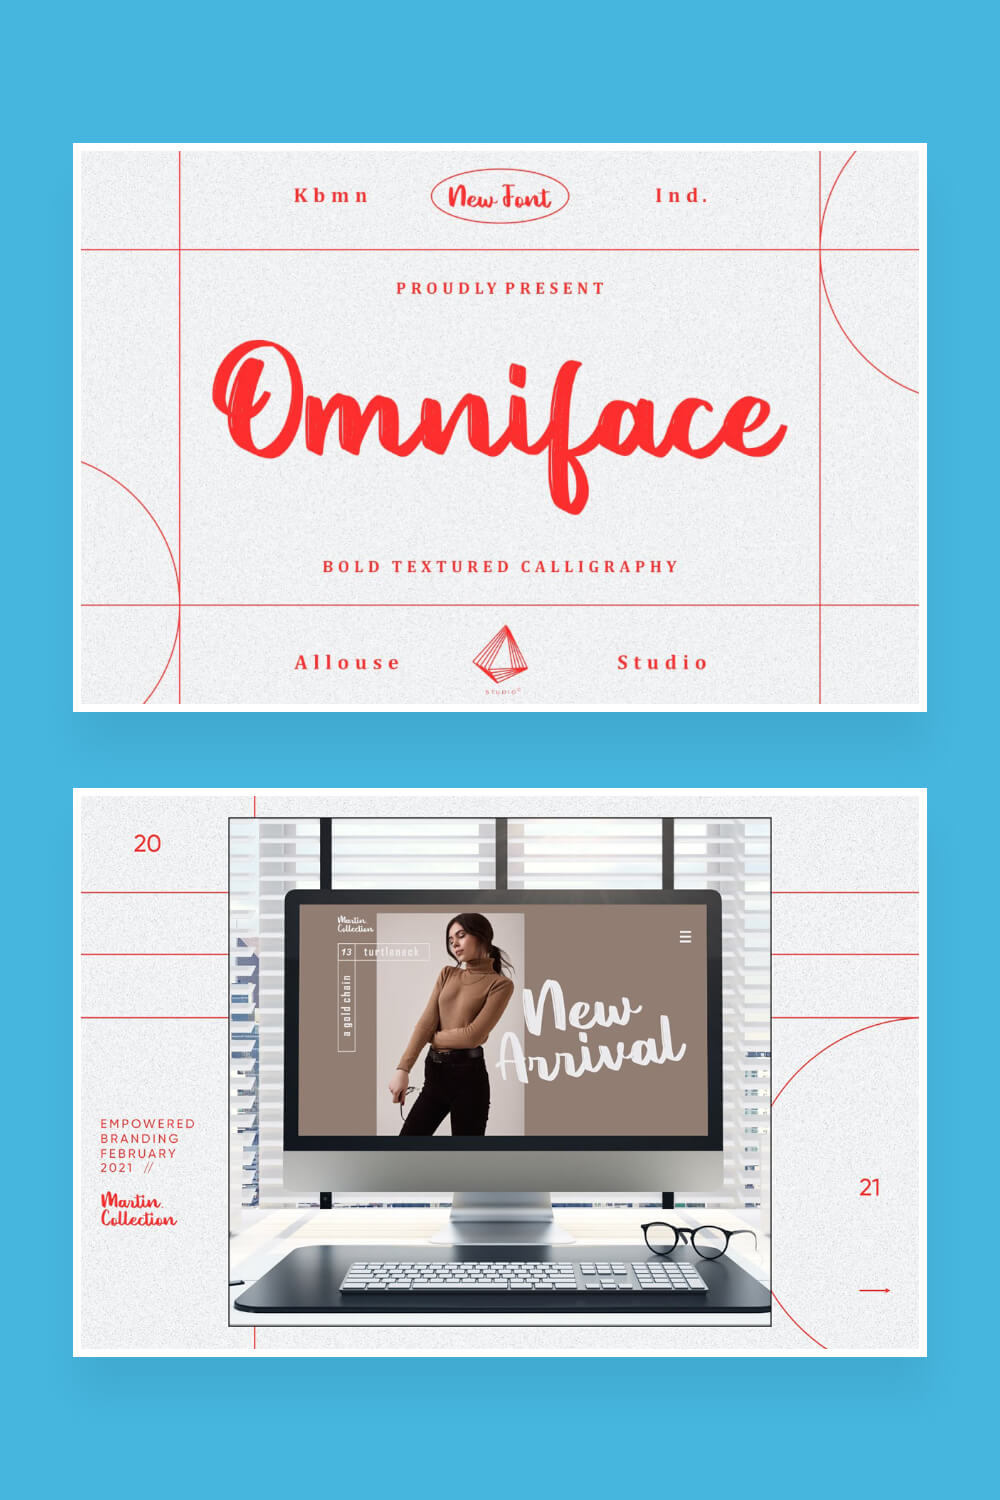 omniface bold textured calligraphy font pinterest image.